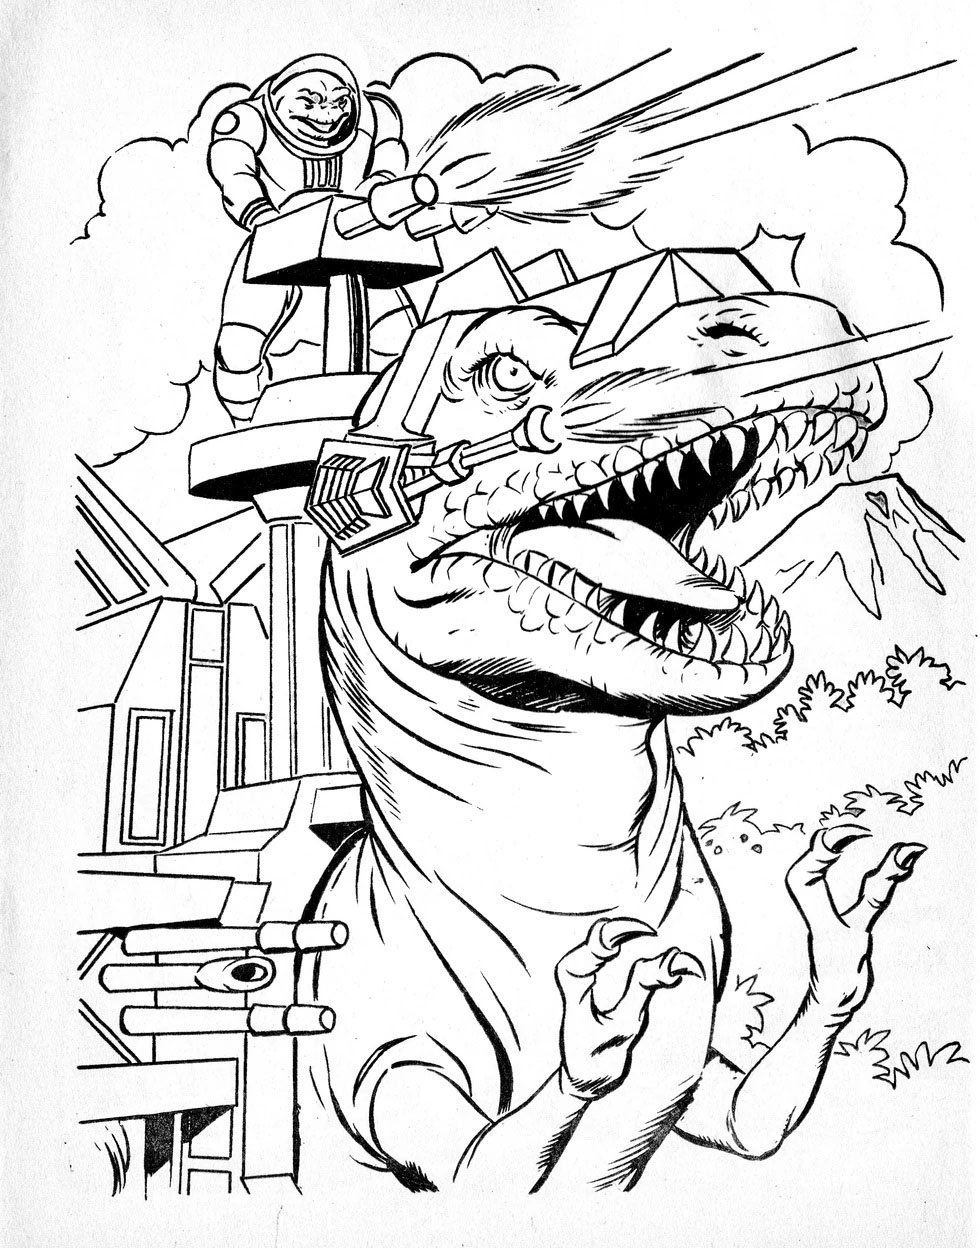 Dino-riders free coloring page